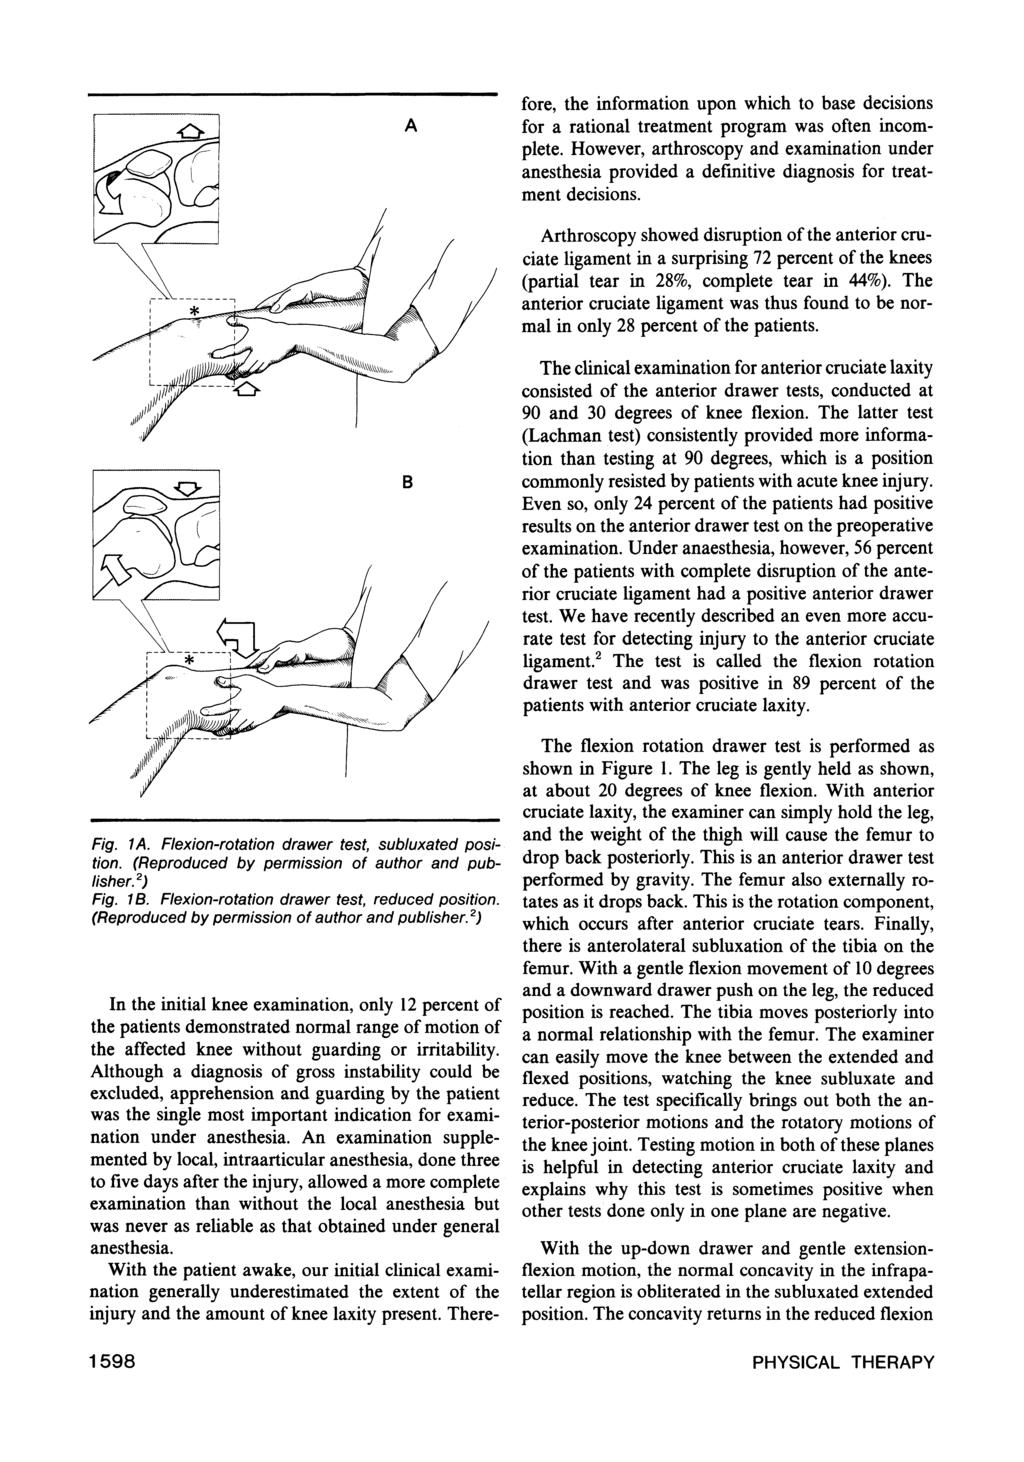 Fig. 1A. Flexion-rotation drawer test, subluxated position. (Reproduced by permission of author and publisher. 2 ) Fig. 1B. Flexion-rotation drawer test, reduced position.